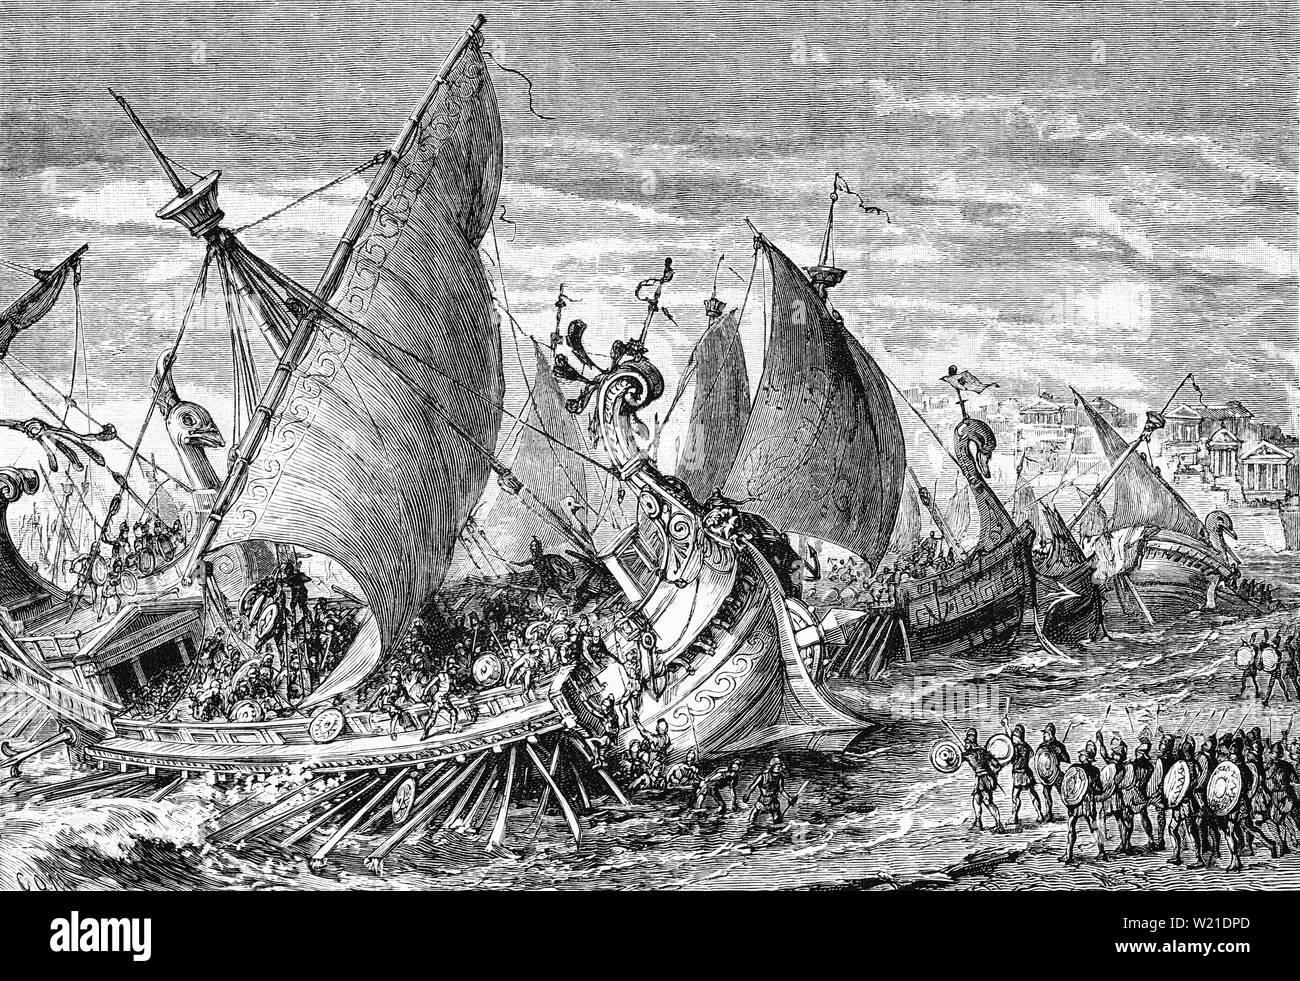 Following the largest single Athenian expedition in the Peloponnesian War, a final sea battle consisting of  many triremes, took place in the Great Harbour at Syracuse in Sicily, part of the Greek Empire (Magna Graecia) in 413 BCe.  The first impetus of the Athenian attack carried them through the Syracusan vessels guarding the boom across the harbour mouth. The Athenians began loosening the chained merchantmen, but other Syracusan warships appeared from all directions and the fighting spread throughout the harbour, from which Syracuse and Sparta Athens and its allies emerged victorious Stock Photo